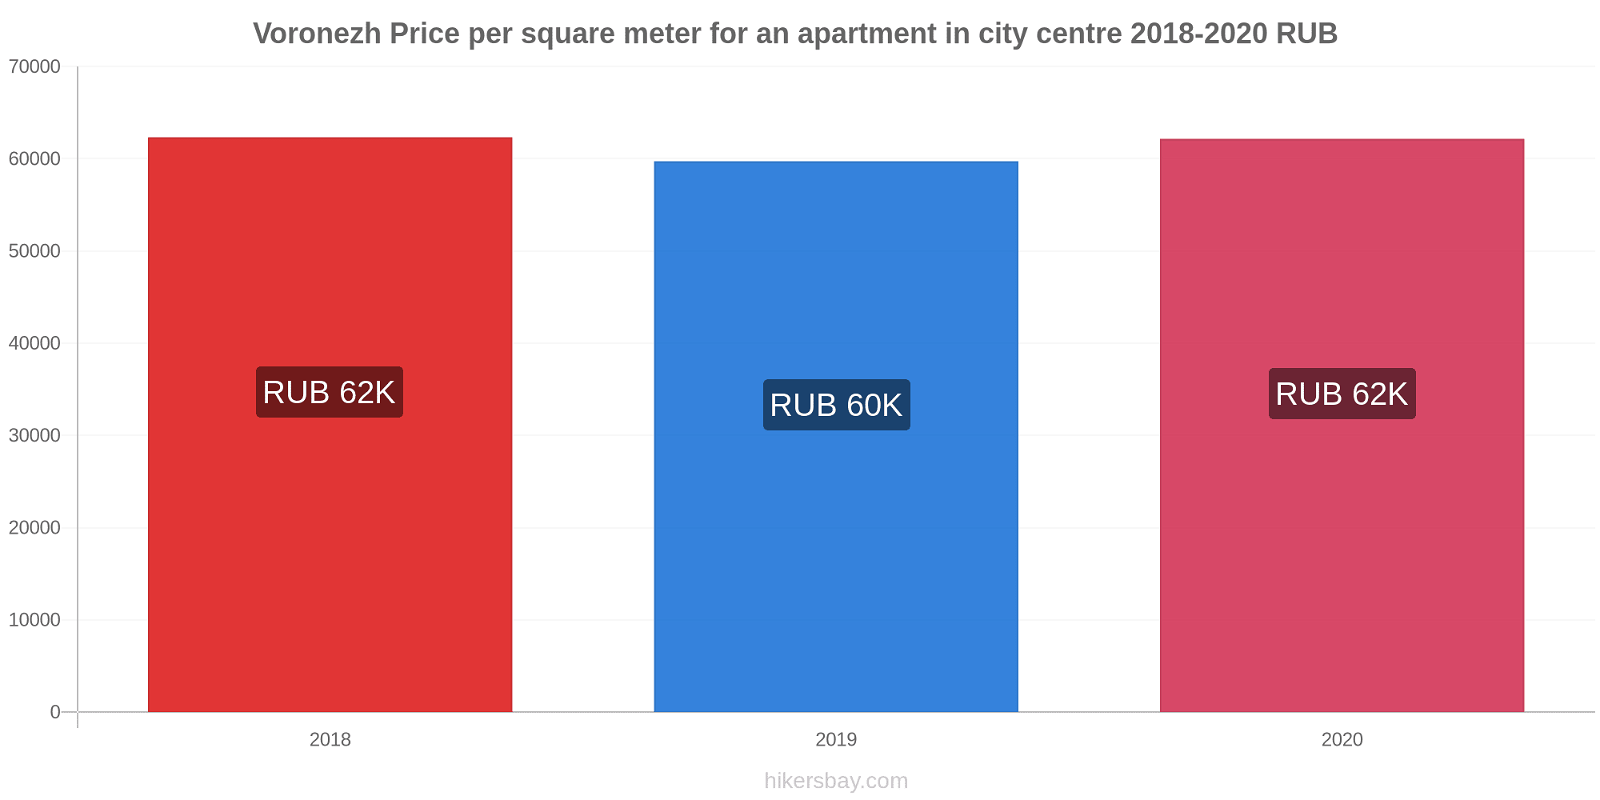 Voronezh price changes Price per square meter for an apartment in city centre hikersbay.com